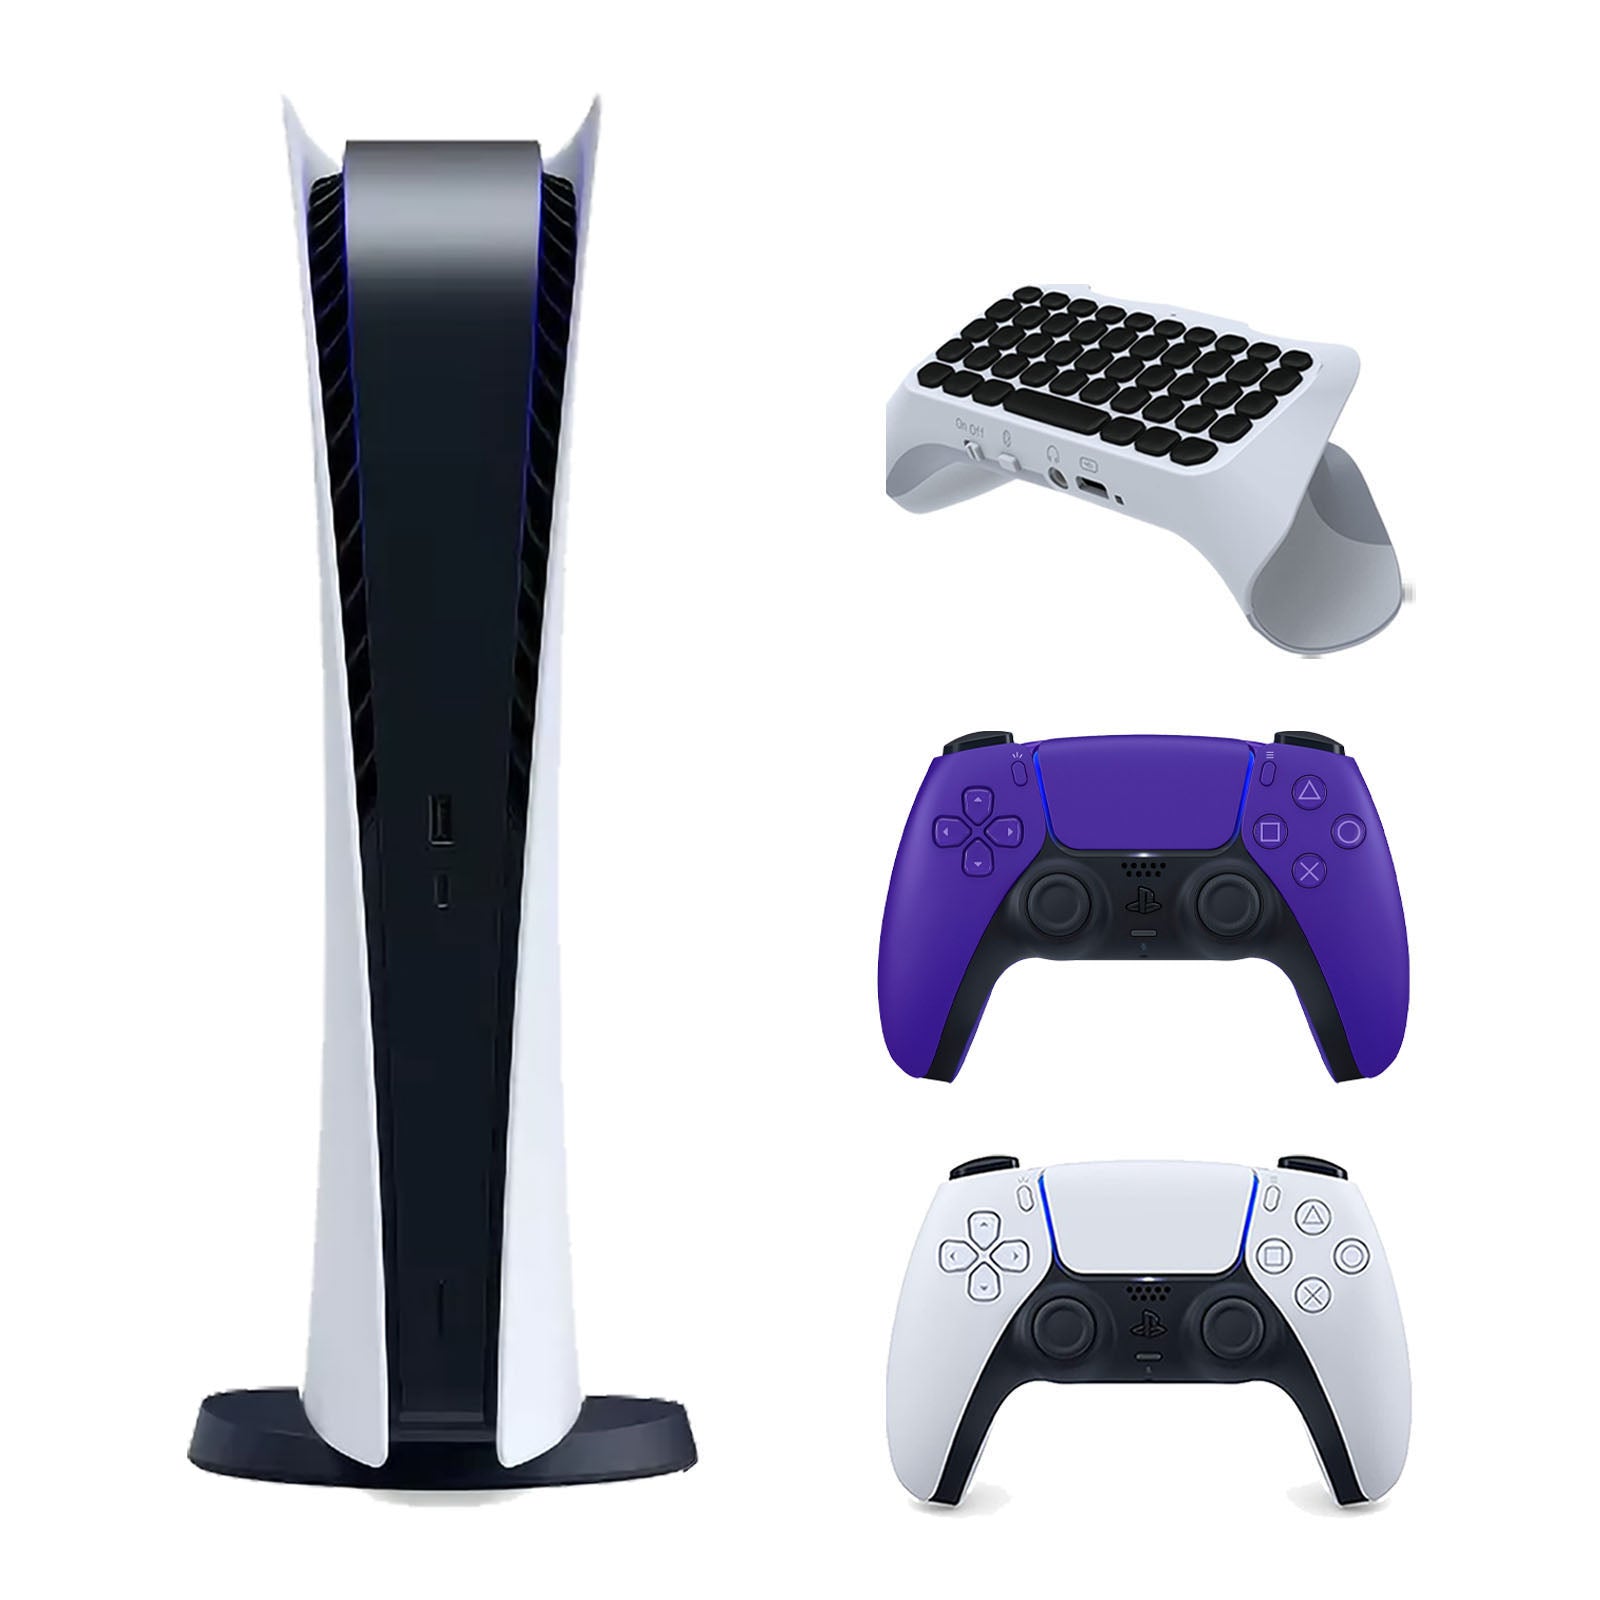 Sony Playstation 5 Digital Edition Console with Extra Purple Controller and Surge QuickType 2.0 Wireless PS5 Controller Keypad Bundle - Pro-Distributing